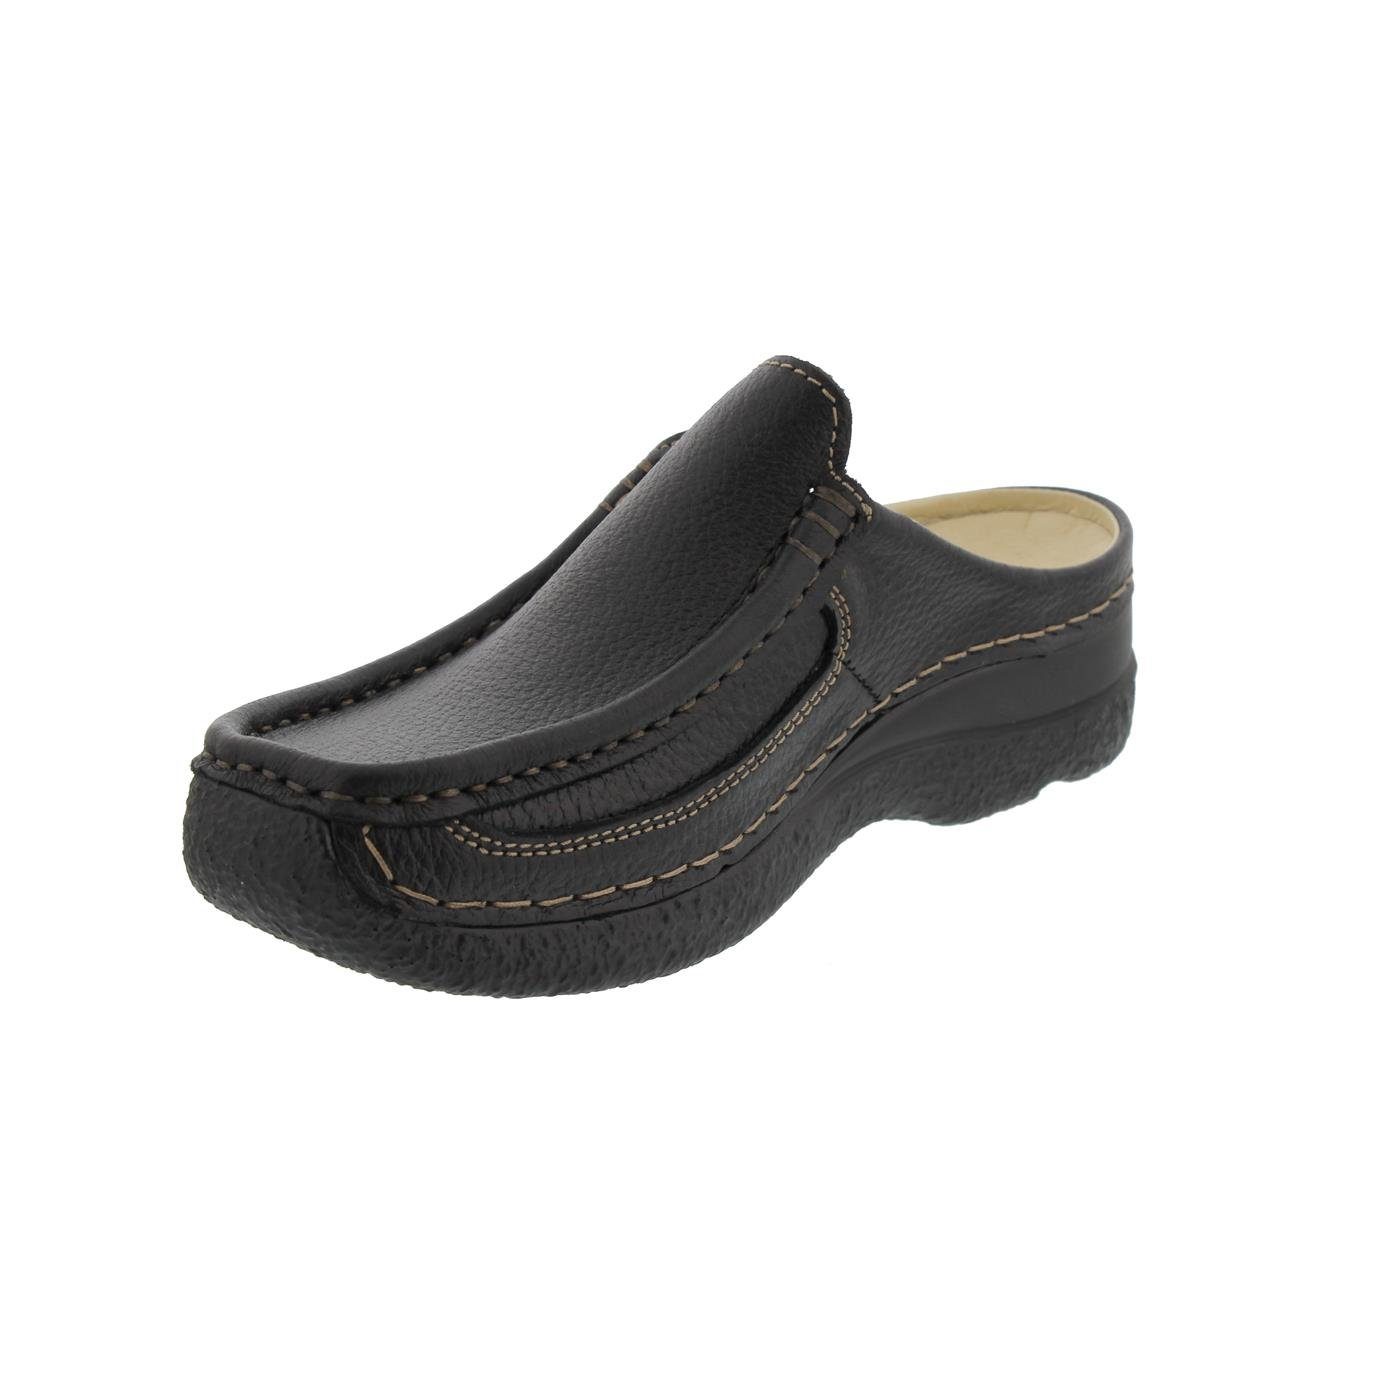 Printed Clog, black, WOLKY Roll-Slide, Clog leather, 0620270-000